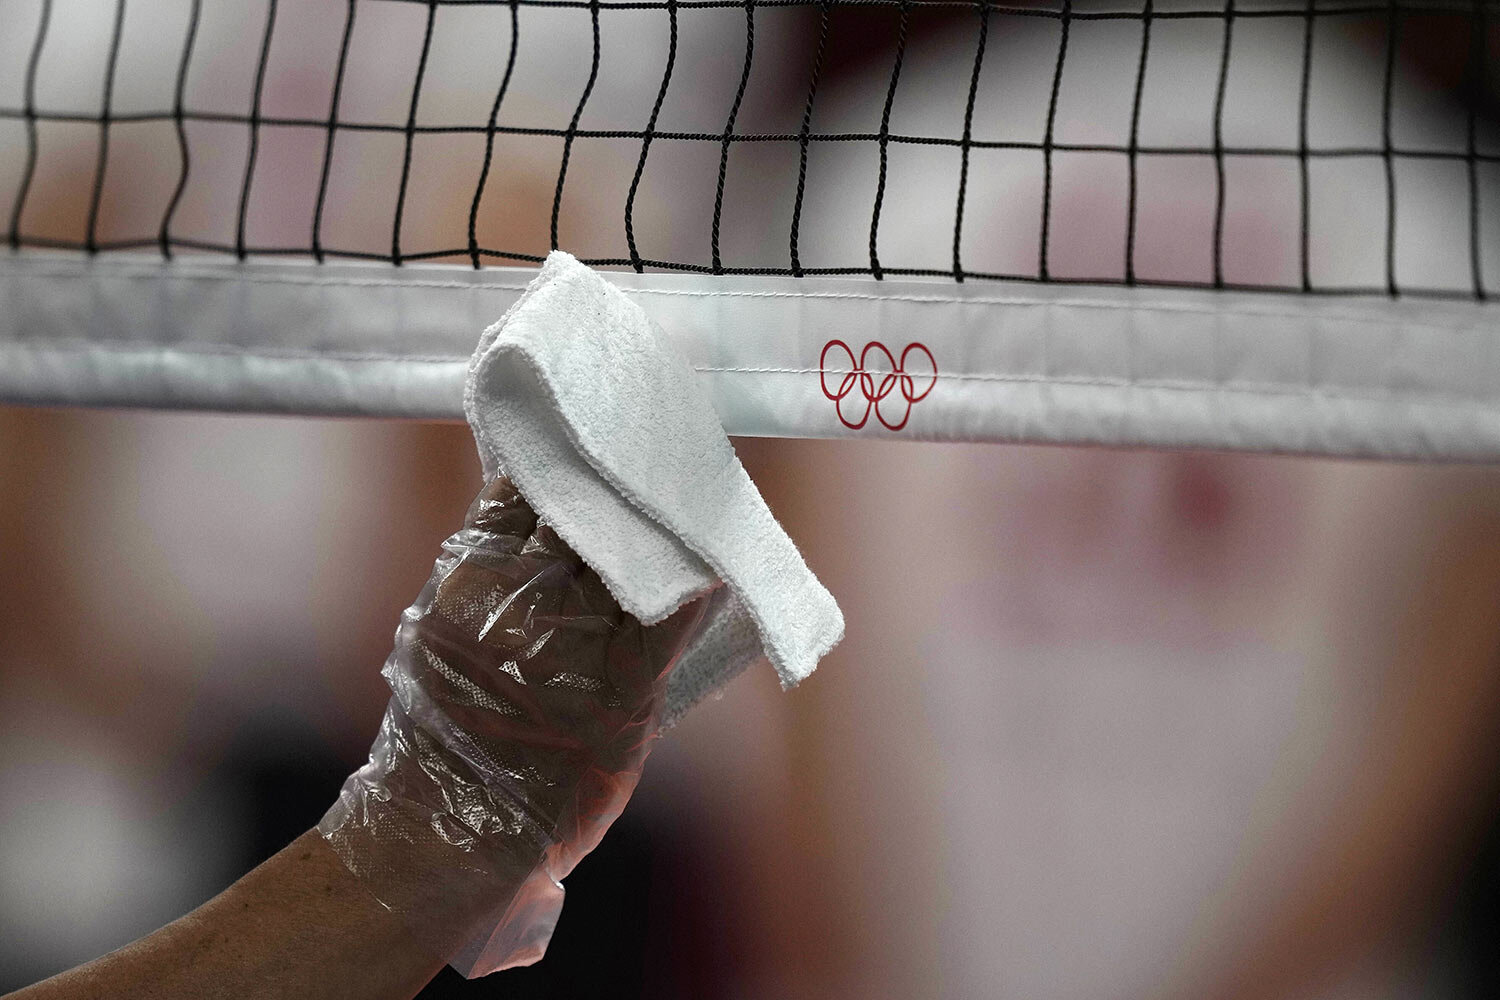  A steward uses a plastic glove and a cloth to disinfect the volleyball net during a rehearsal before the start of the volleyball preliminaries at Ariake Arena at the 2020 Summer Olympics, Friday, July 23, 2021, in Tokyo, Japan. (AP Photo/Frank Augst